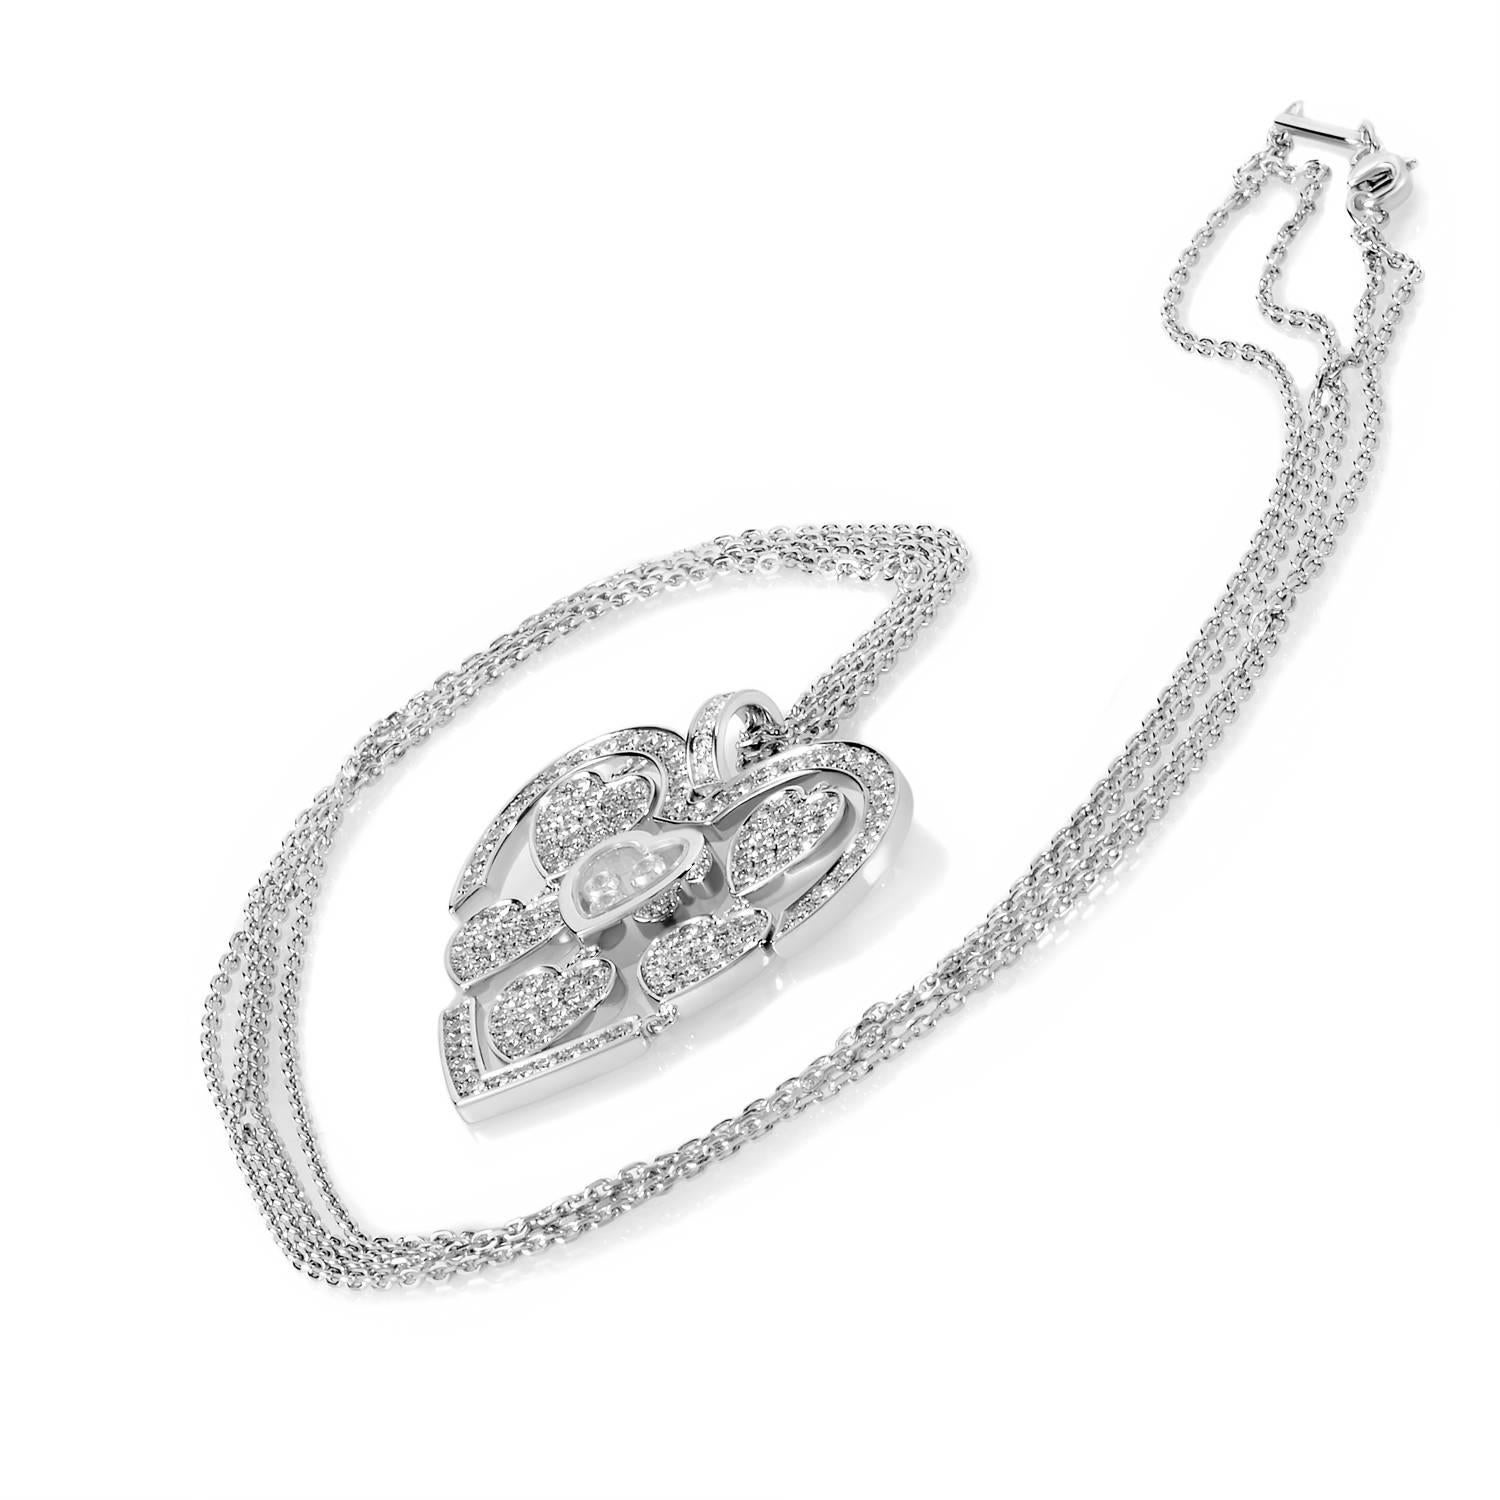 This Happy Amore Pendant Necklace from Chopard features an alluring, feminine design that will leave you breathless. Its heart-shaped pendant is adorned with 2.38 ct. worth of diamonds and hangs from an beautiful 23-inch chain.